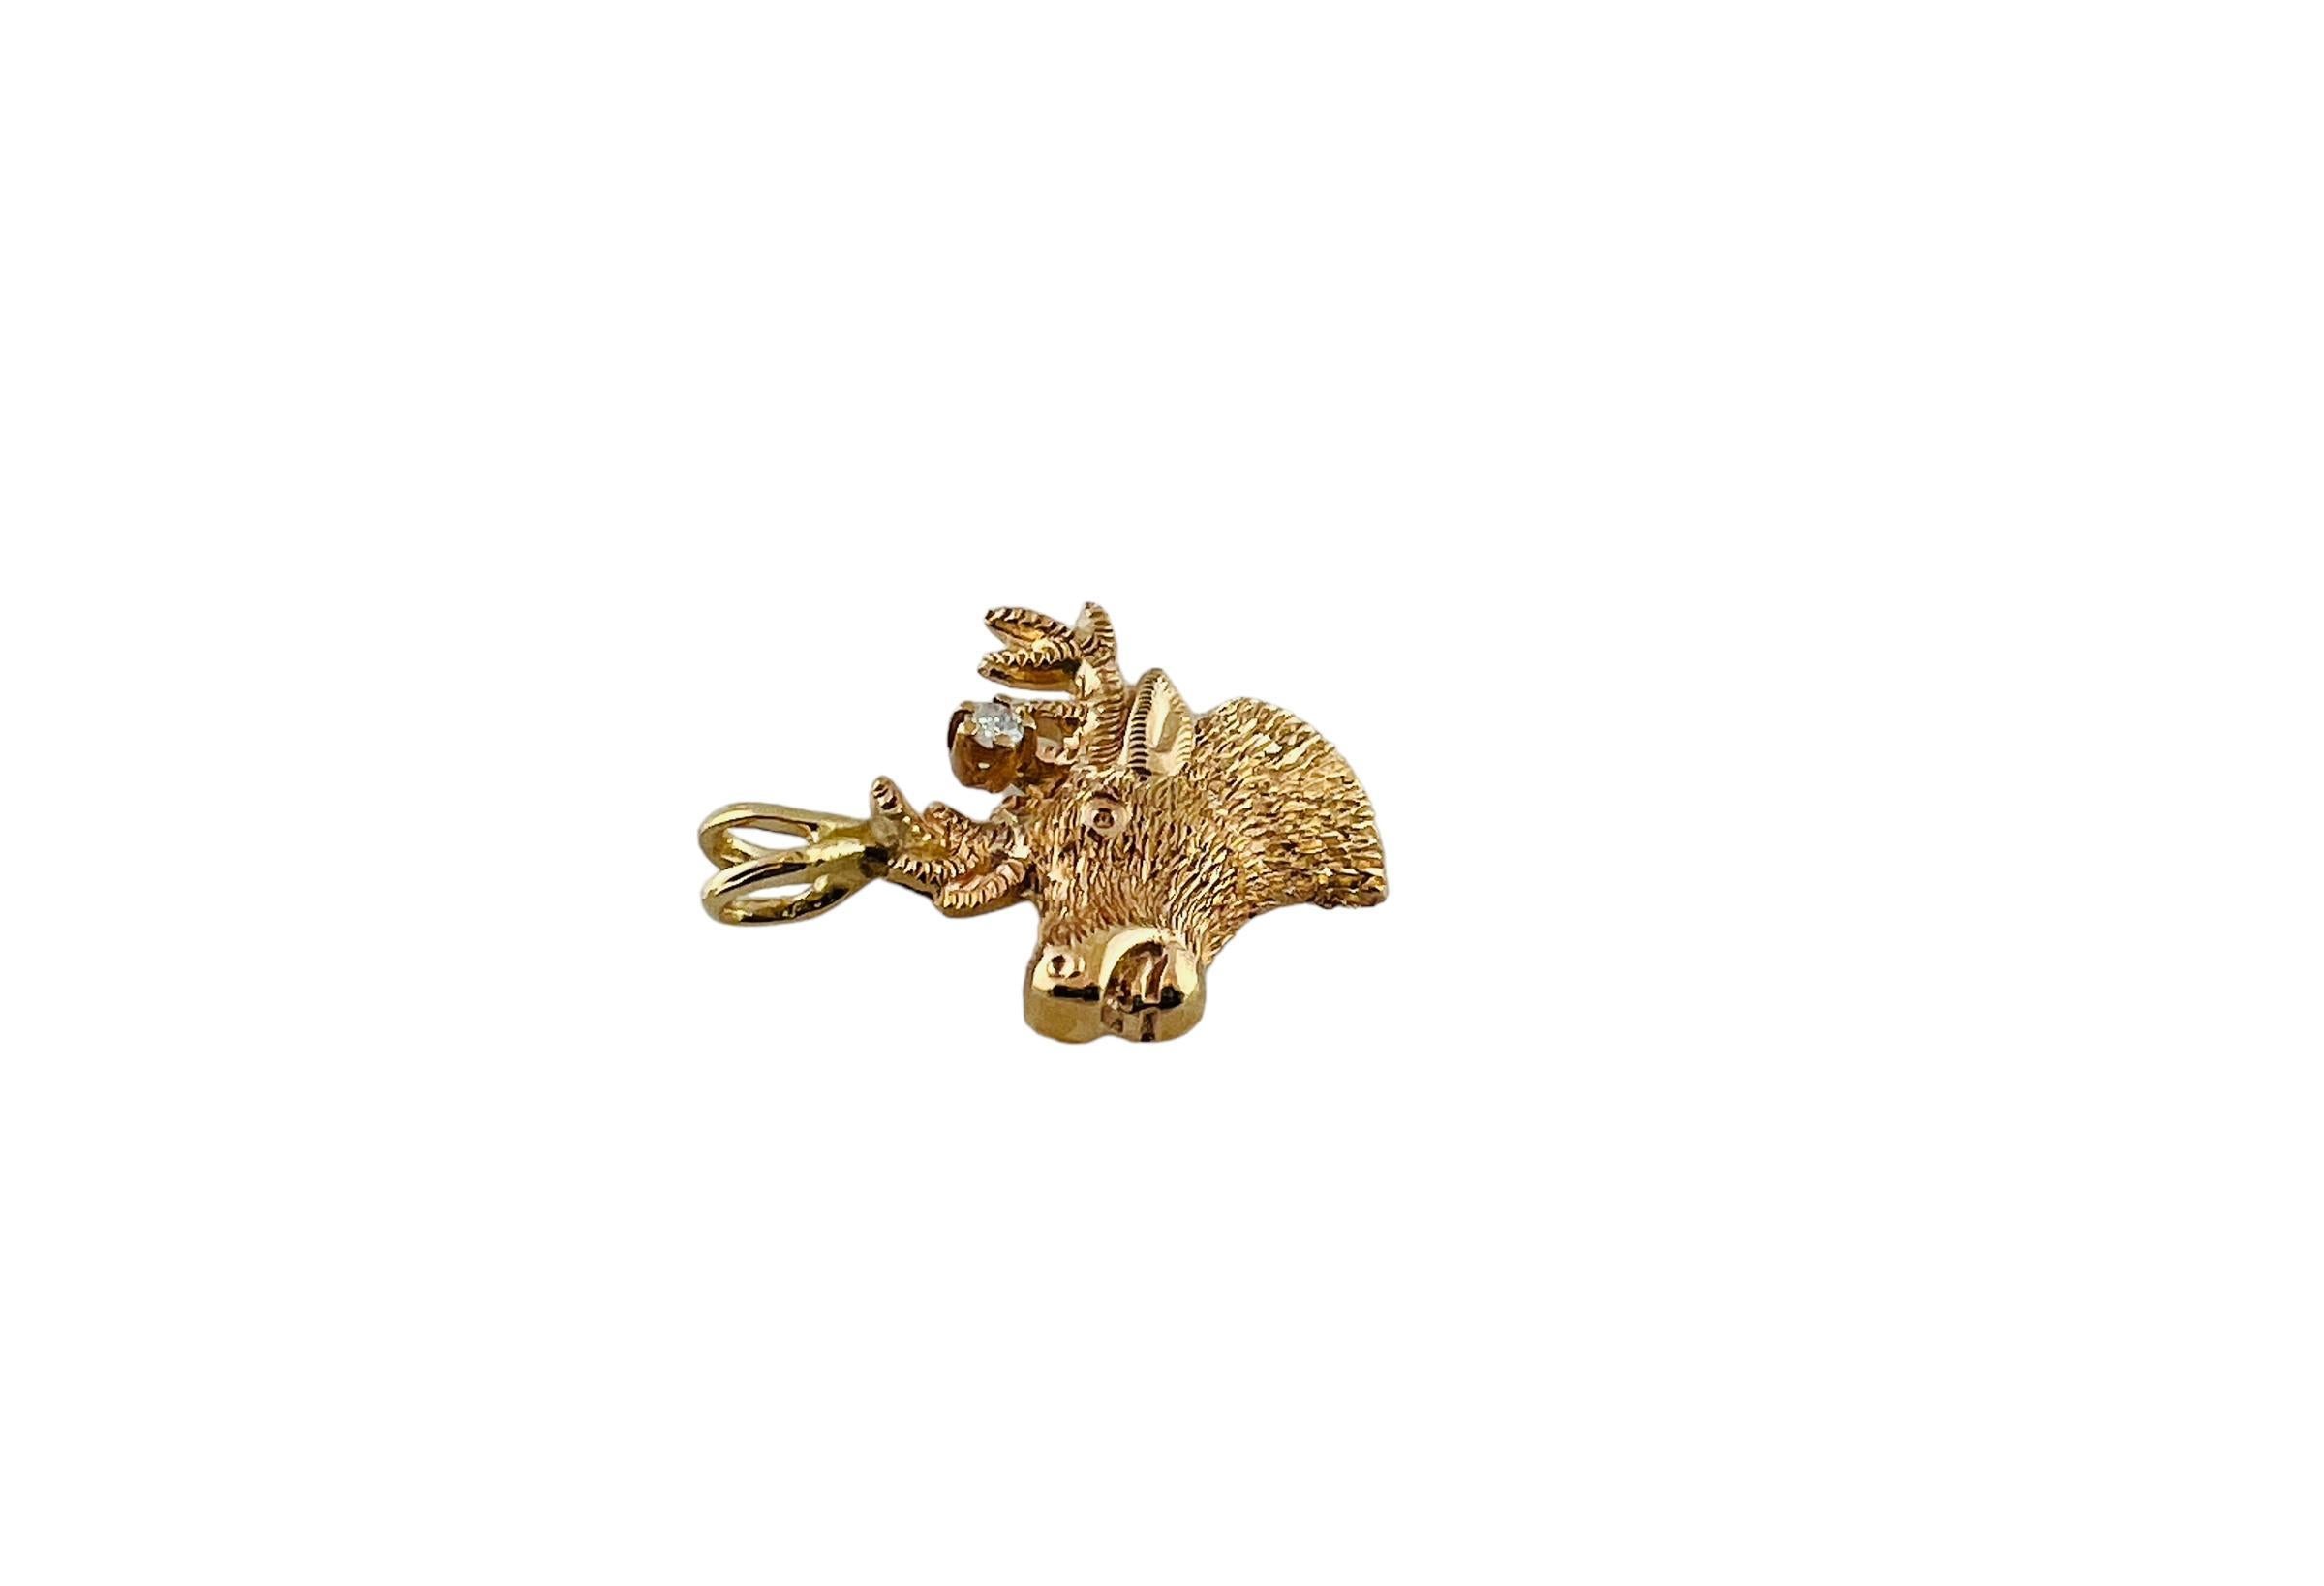 This deer head charm is set in 10K textured yellow gold

A single cut diamond accents the antlers

Diamond is approx. .01 ct and of I1 clarity and I color

Stamped 10K

Measures approx 15.0 x 15.0 x 2.0 mm (without bale)

1.2 g /. 0.7 dwt

Very good